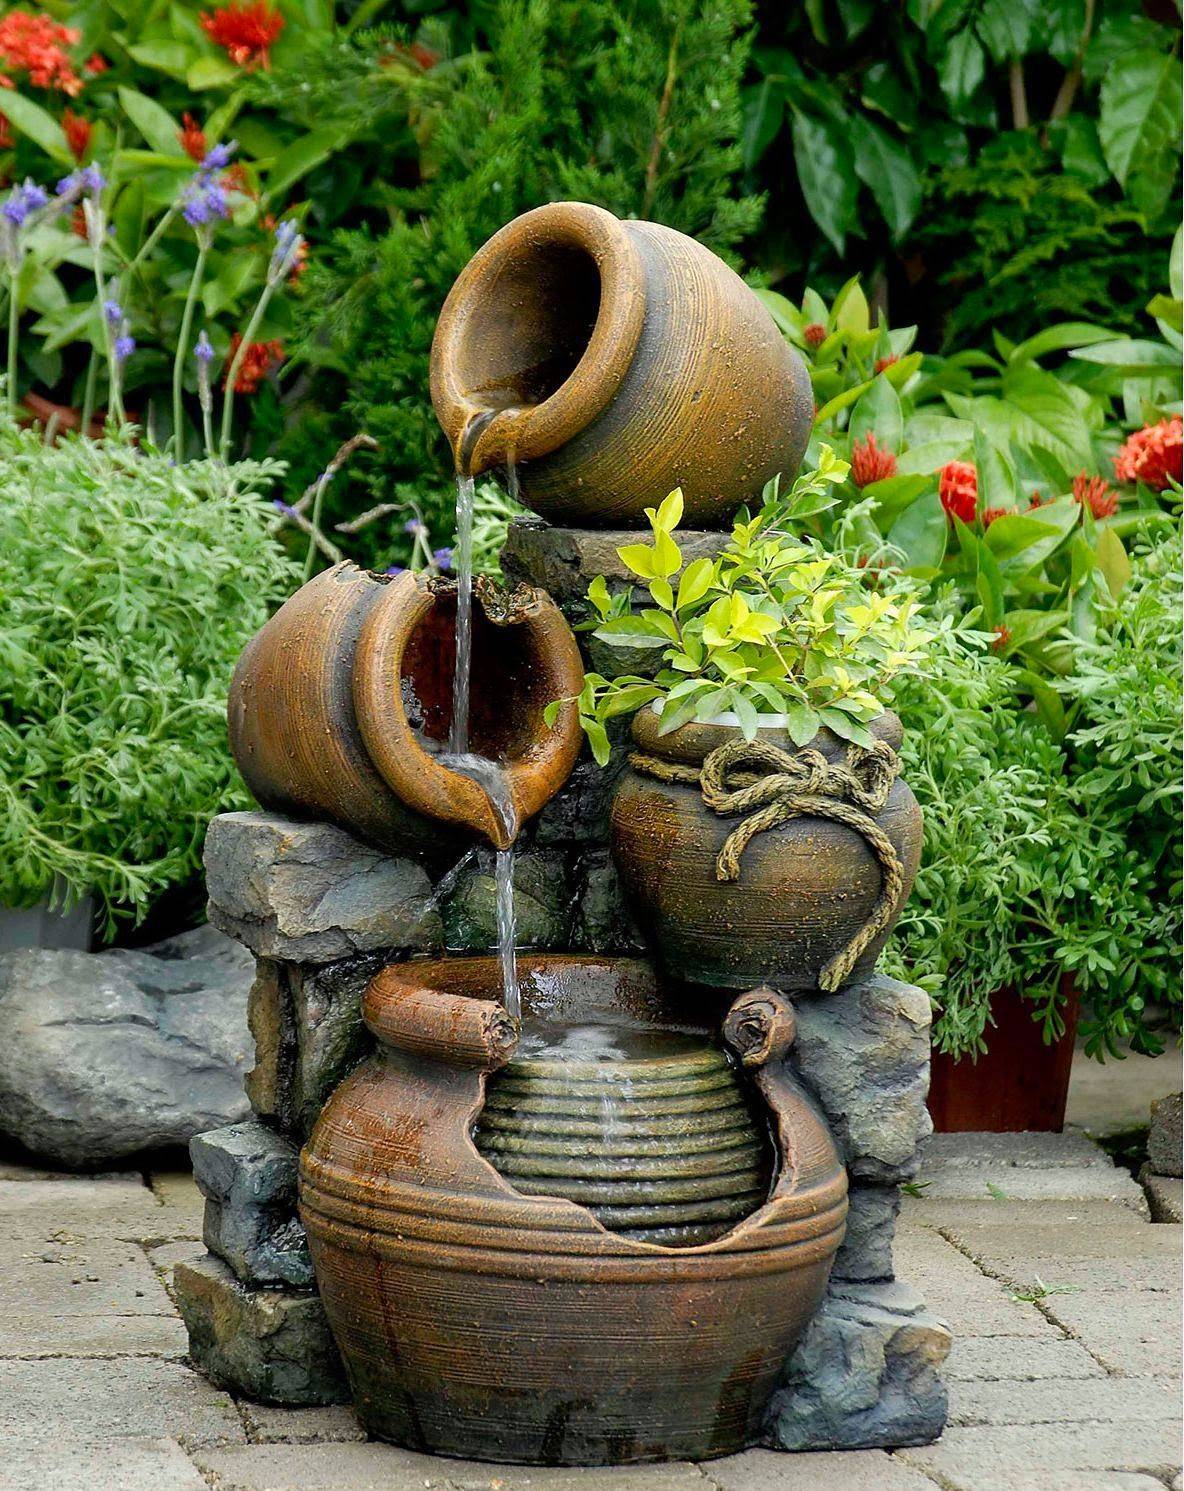 Homemade Water Fountains